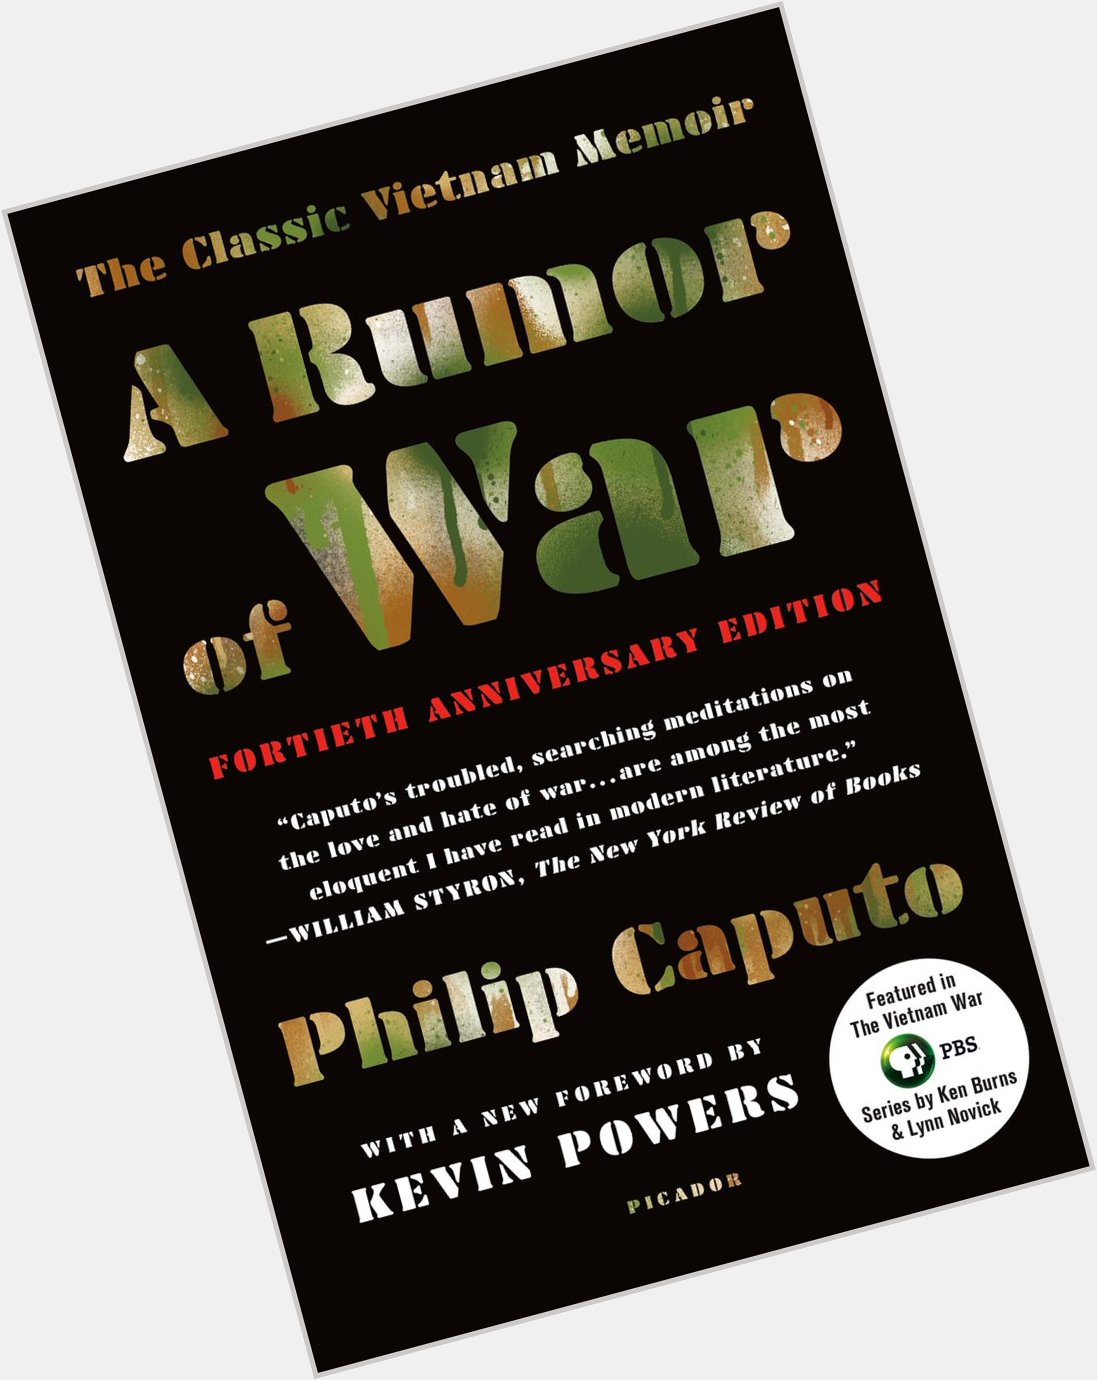 Happy 78th birthday to Philip Caputo, who wrote this novel of his time in Vietnam published in 1977. 